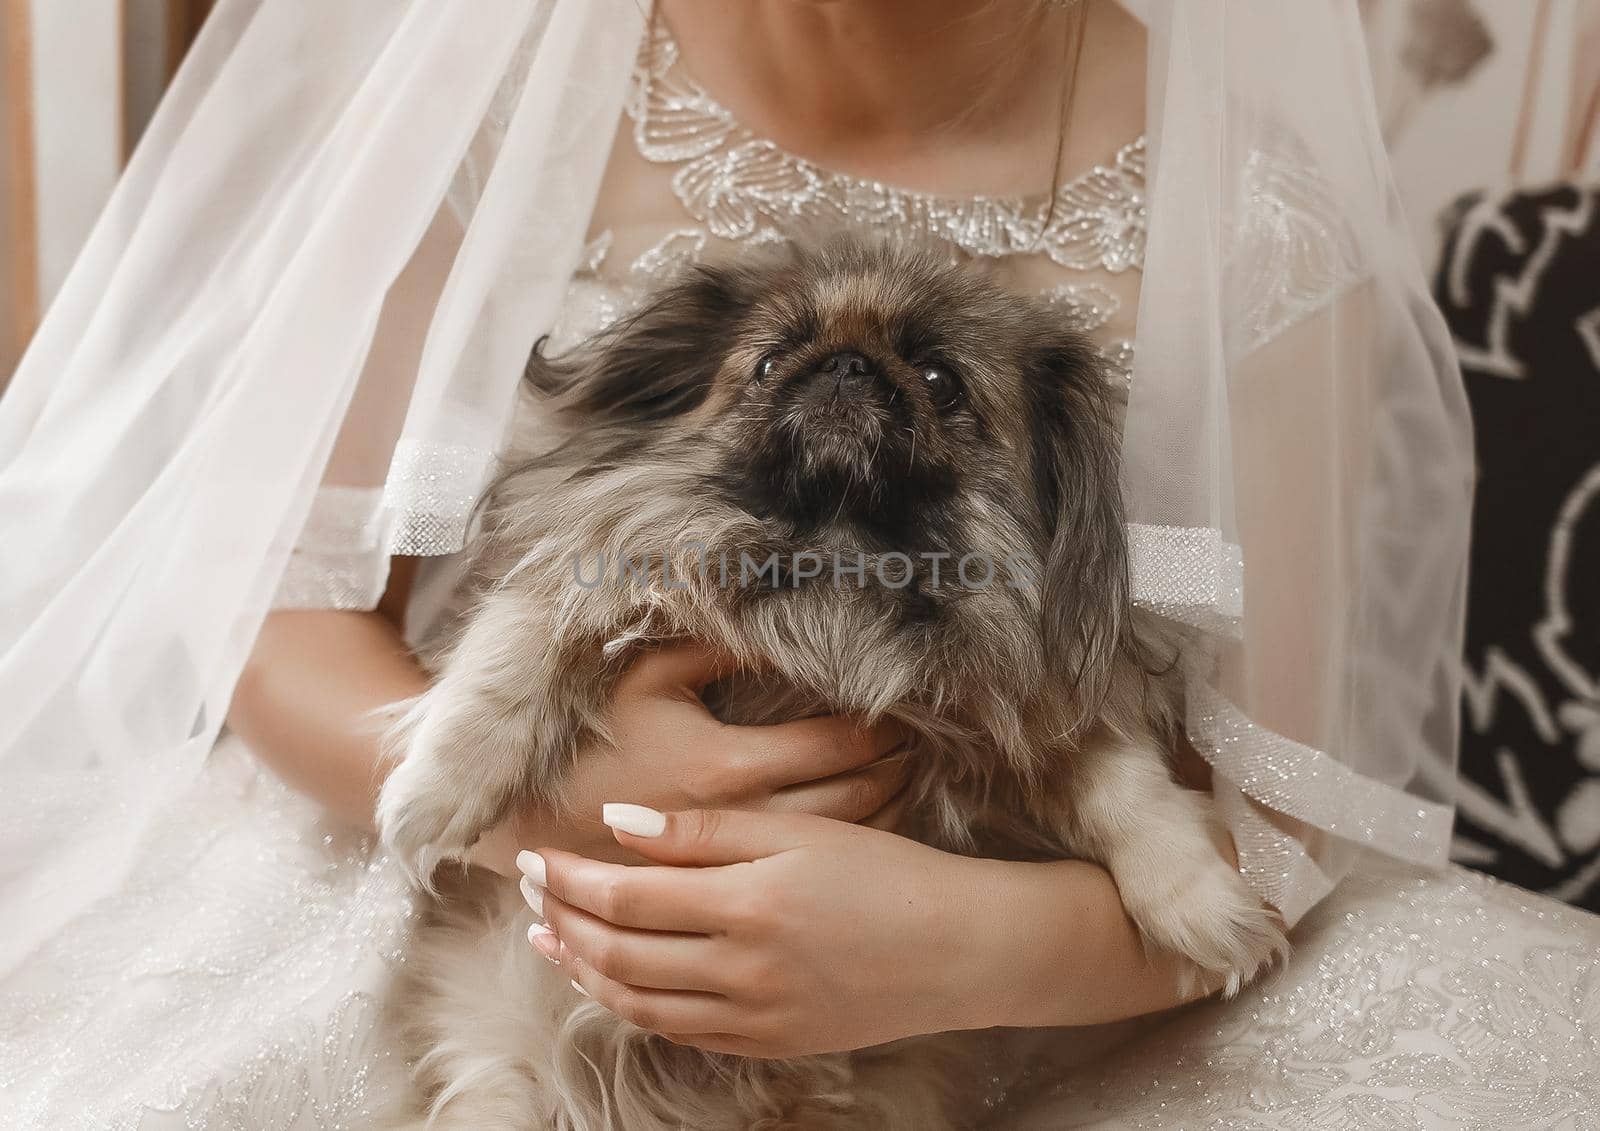 Bride in wedding dress holds a small dog close-up.